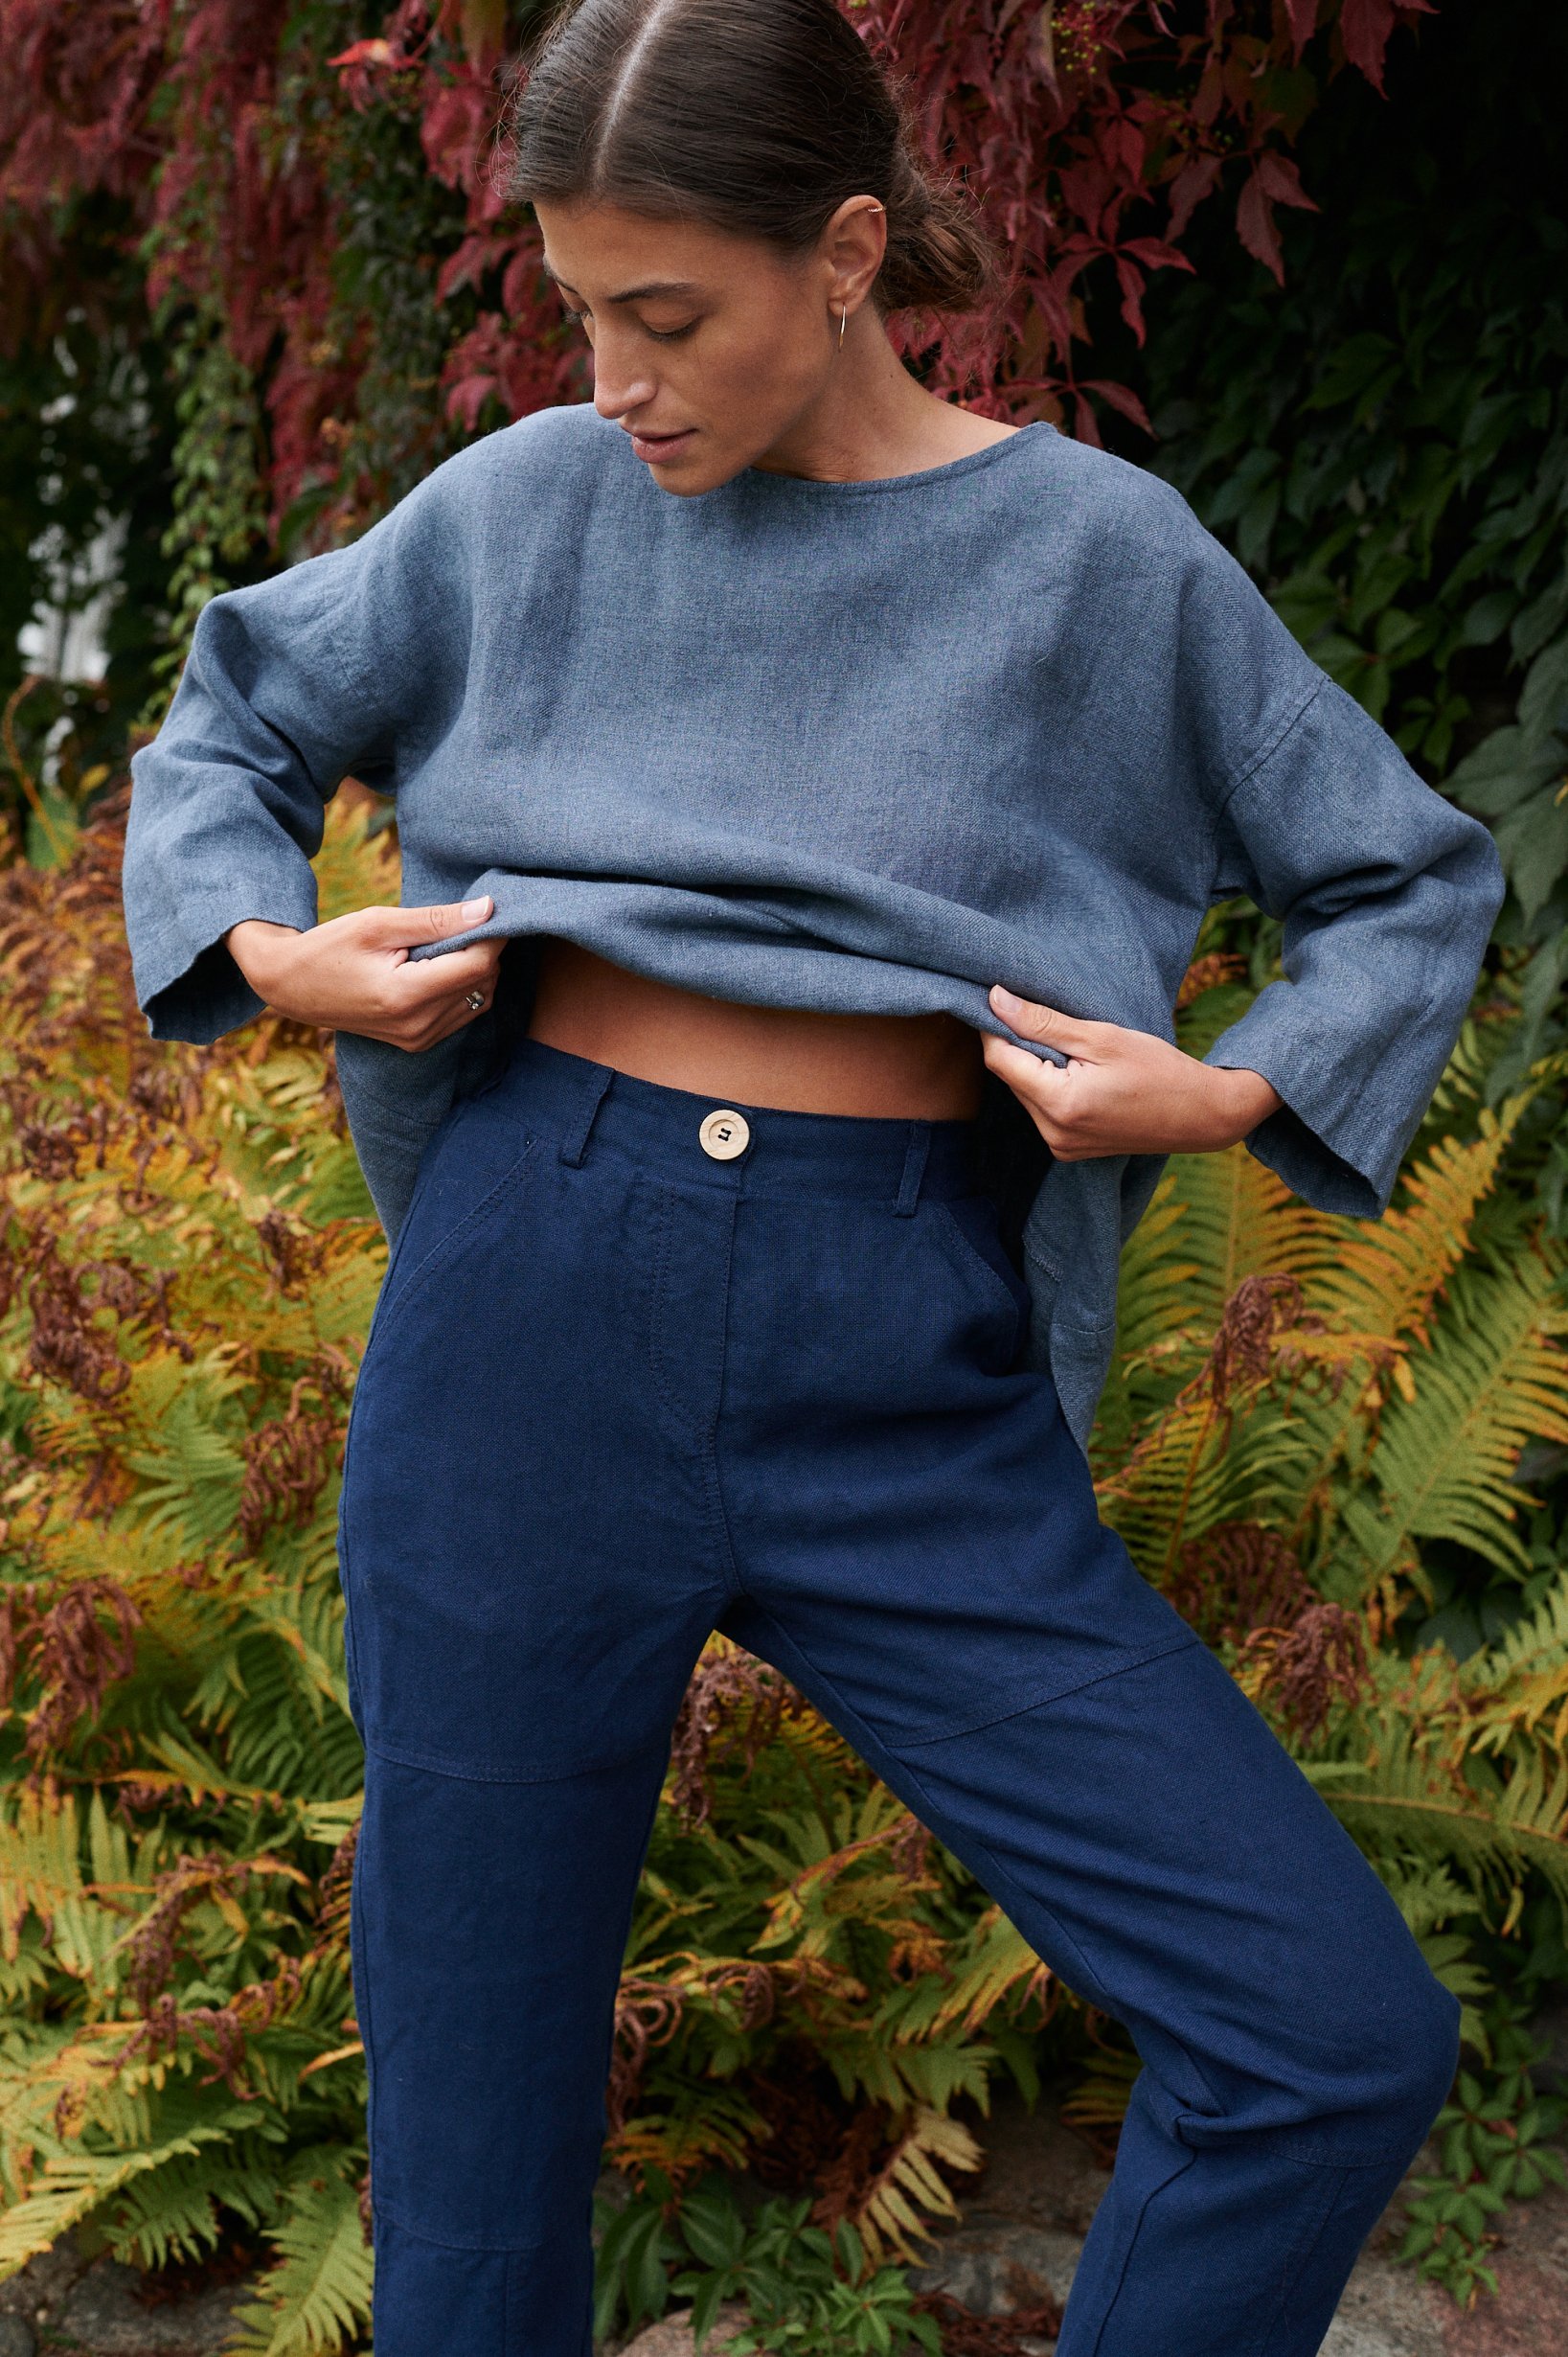 A woman wearing a relaxed linen top and linen utility trousers